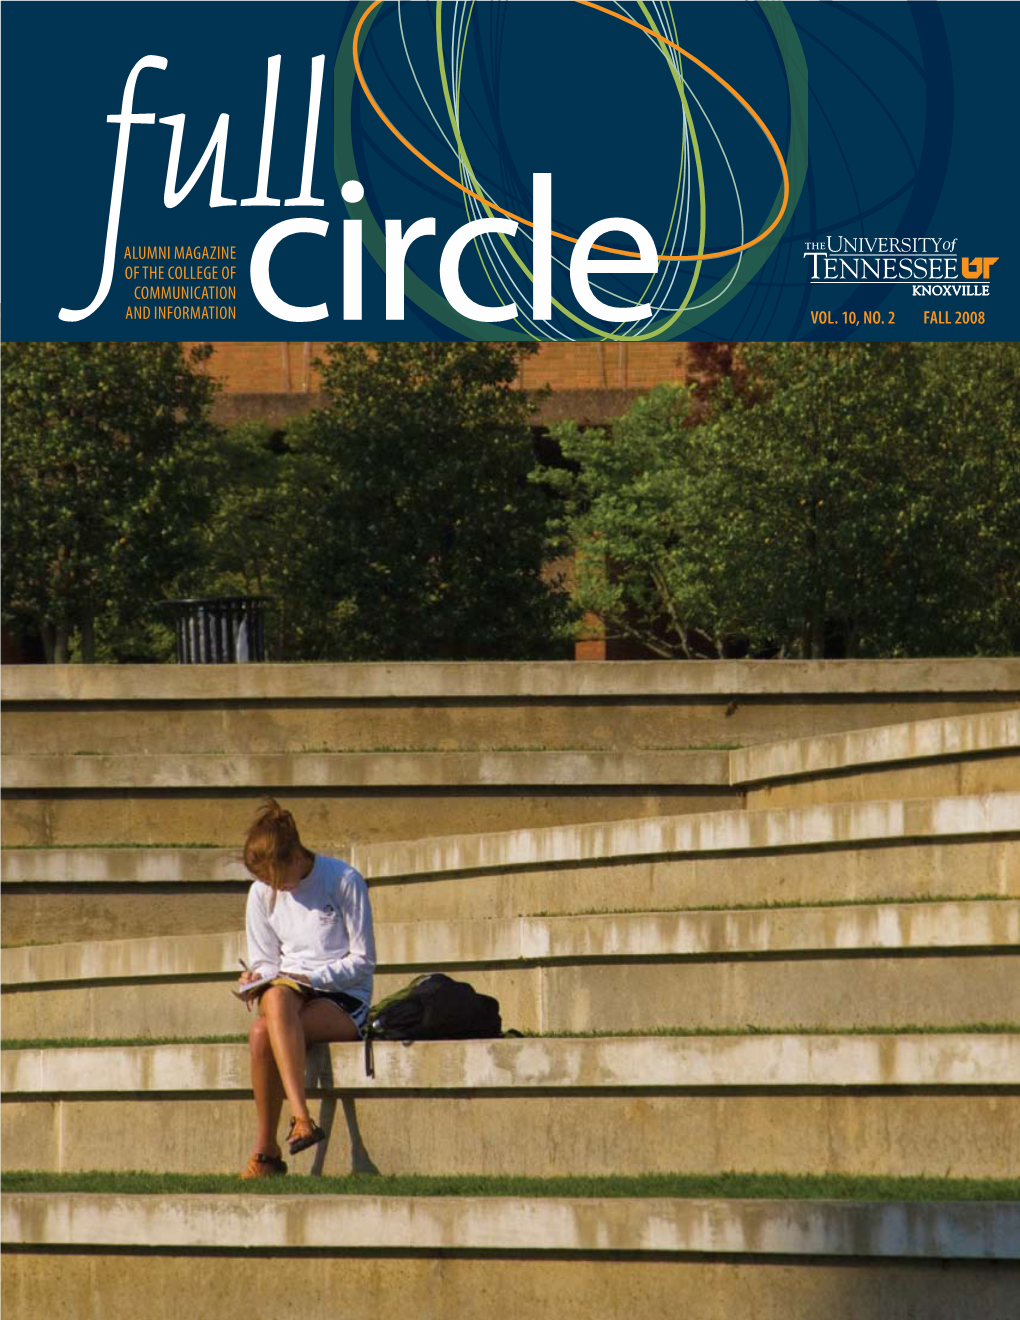 FALL 2008 Full Circle Alumni Magazine of the College of Communication and Information Vol